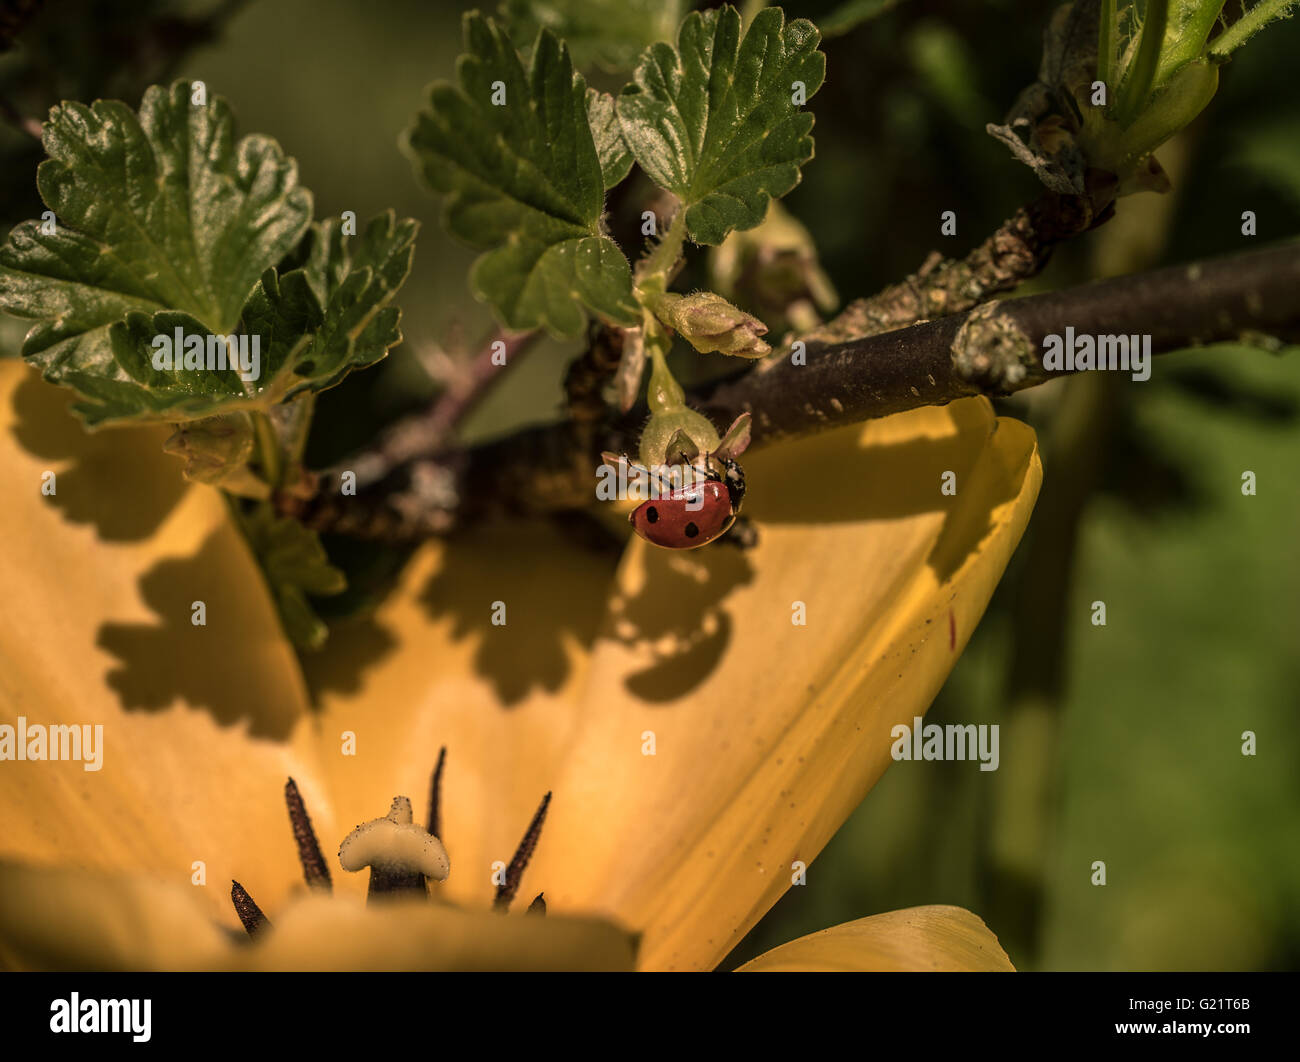 ladybug crawling upside down casting shadow on a yellow flower Stock Photo